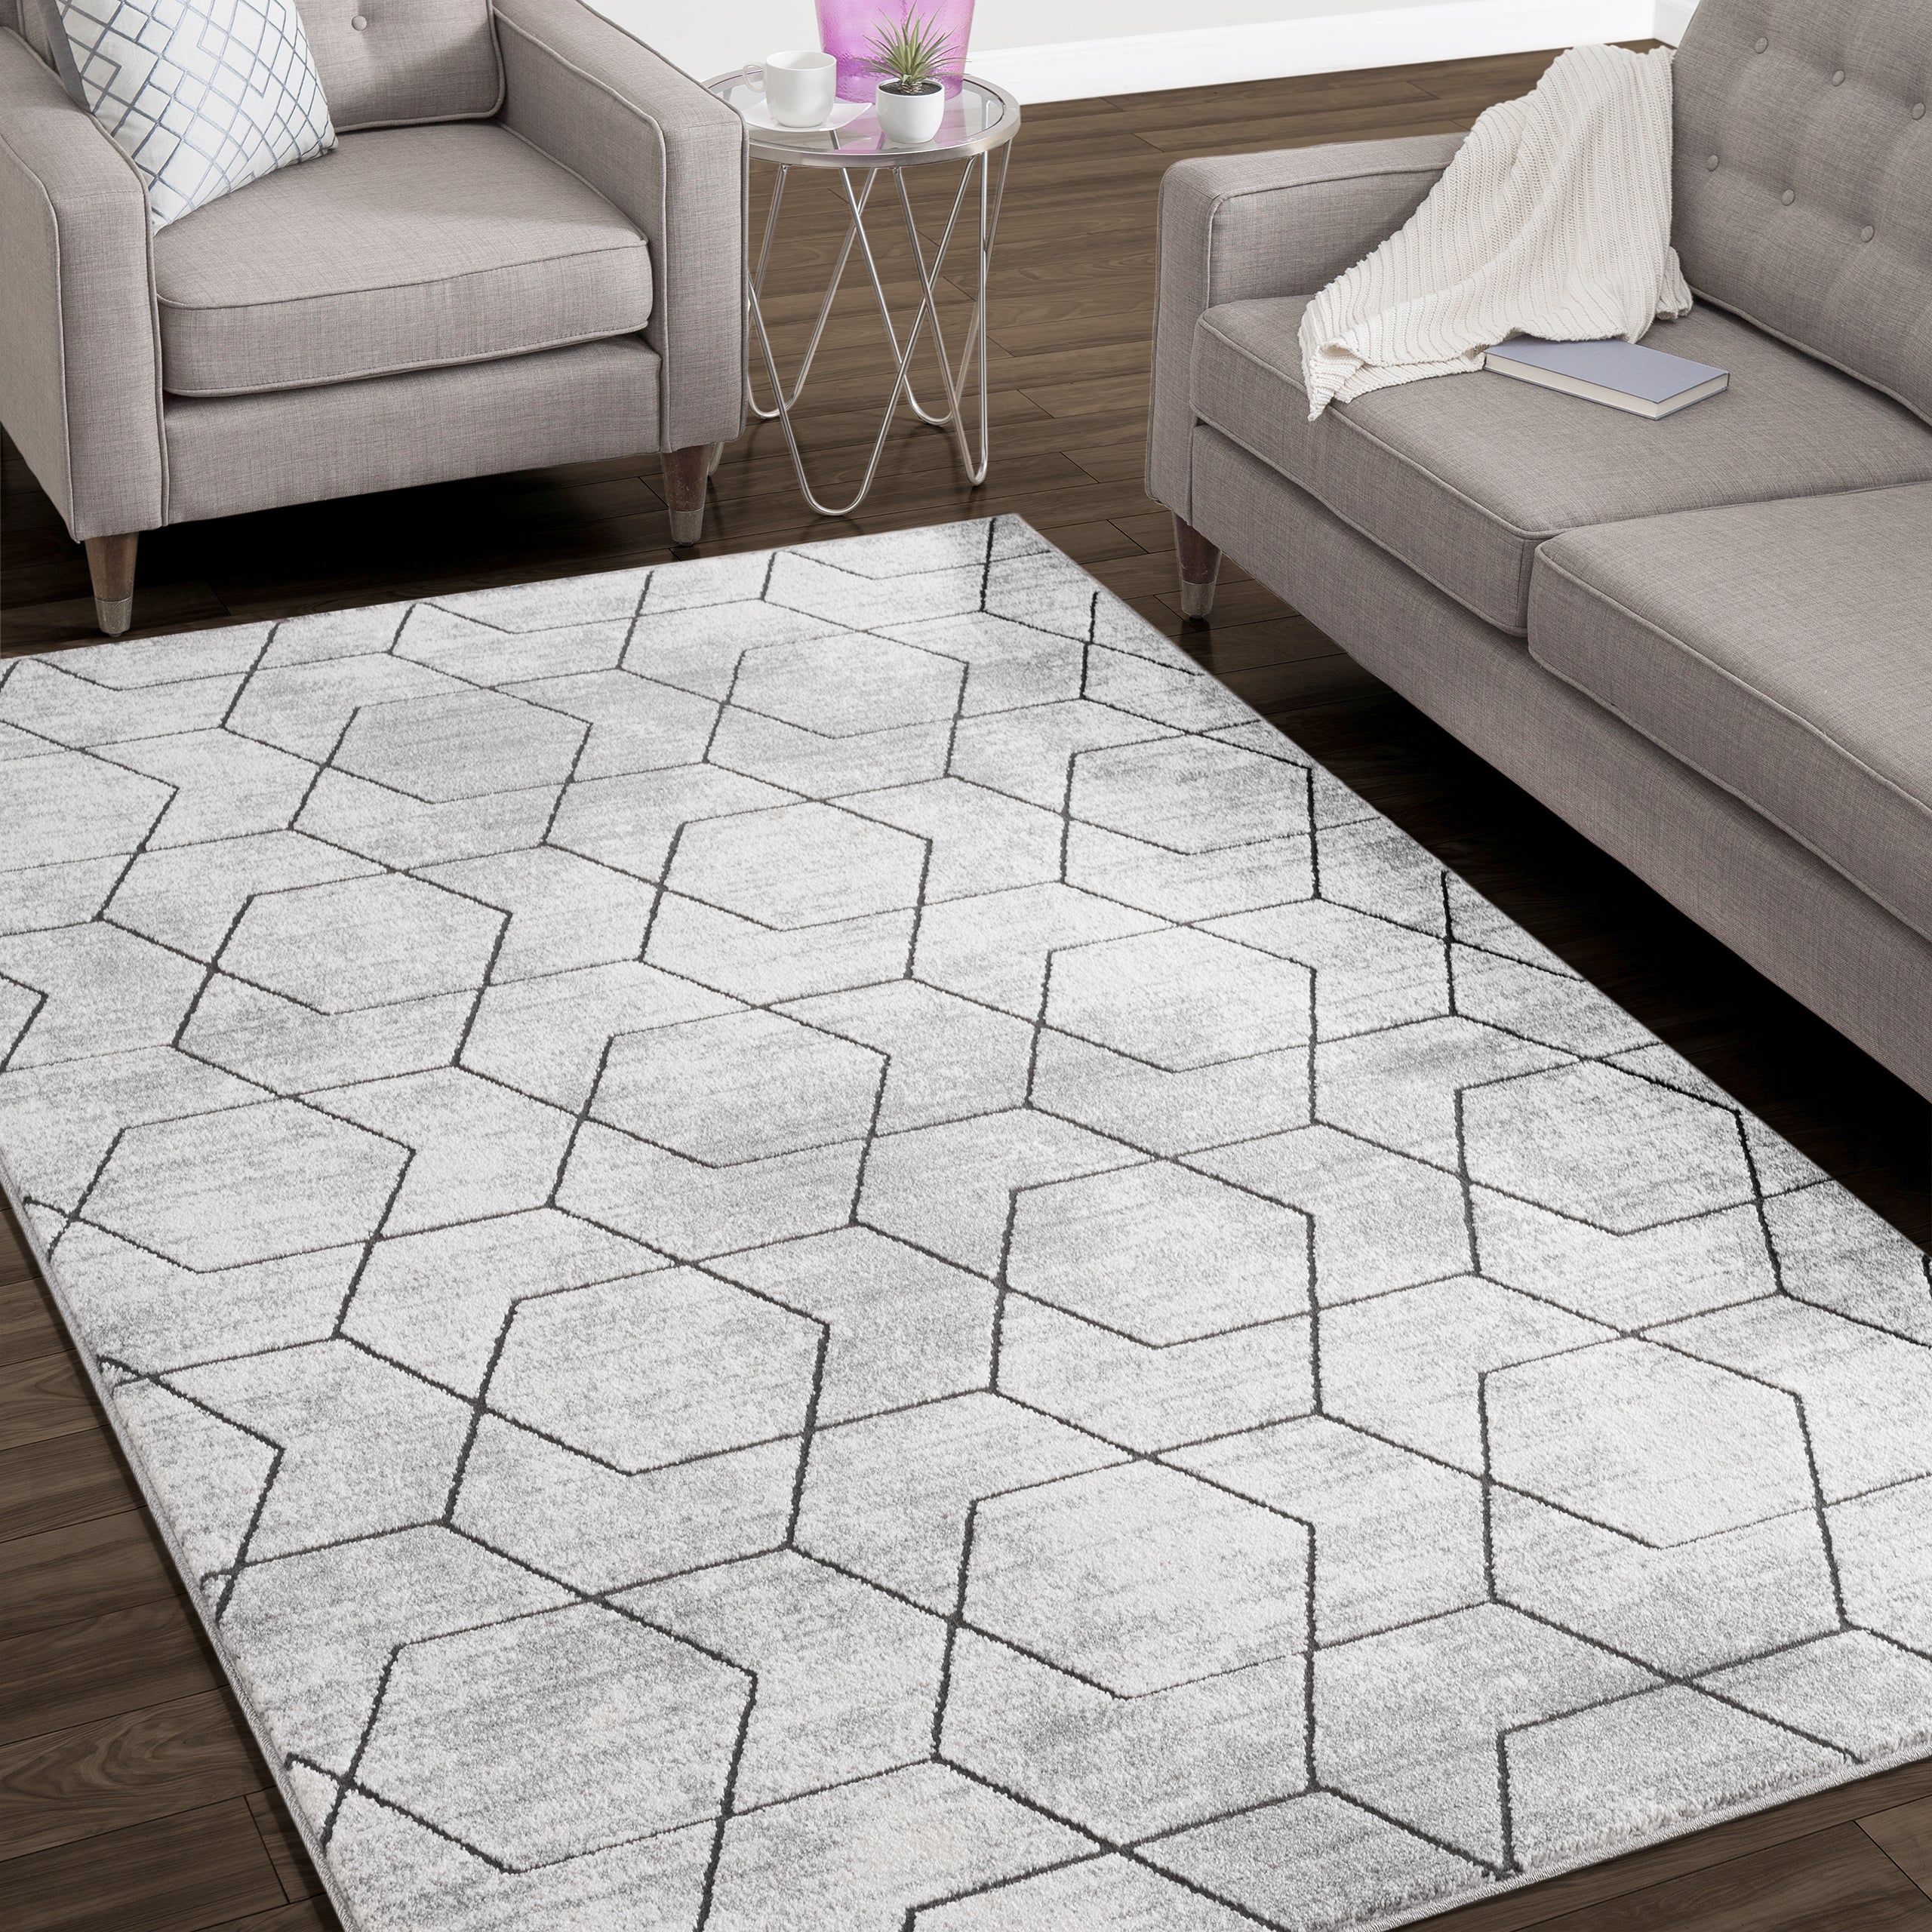 Gray Area Rug 9x12 Clearance For Living Room Large Modern Reduced